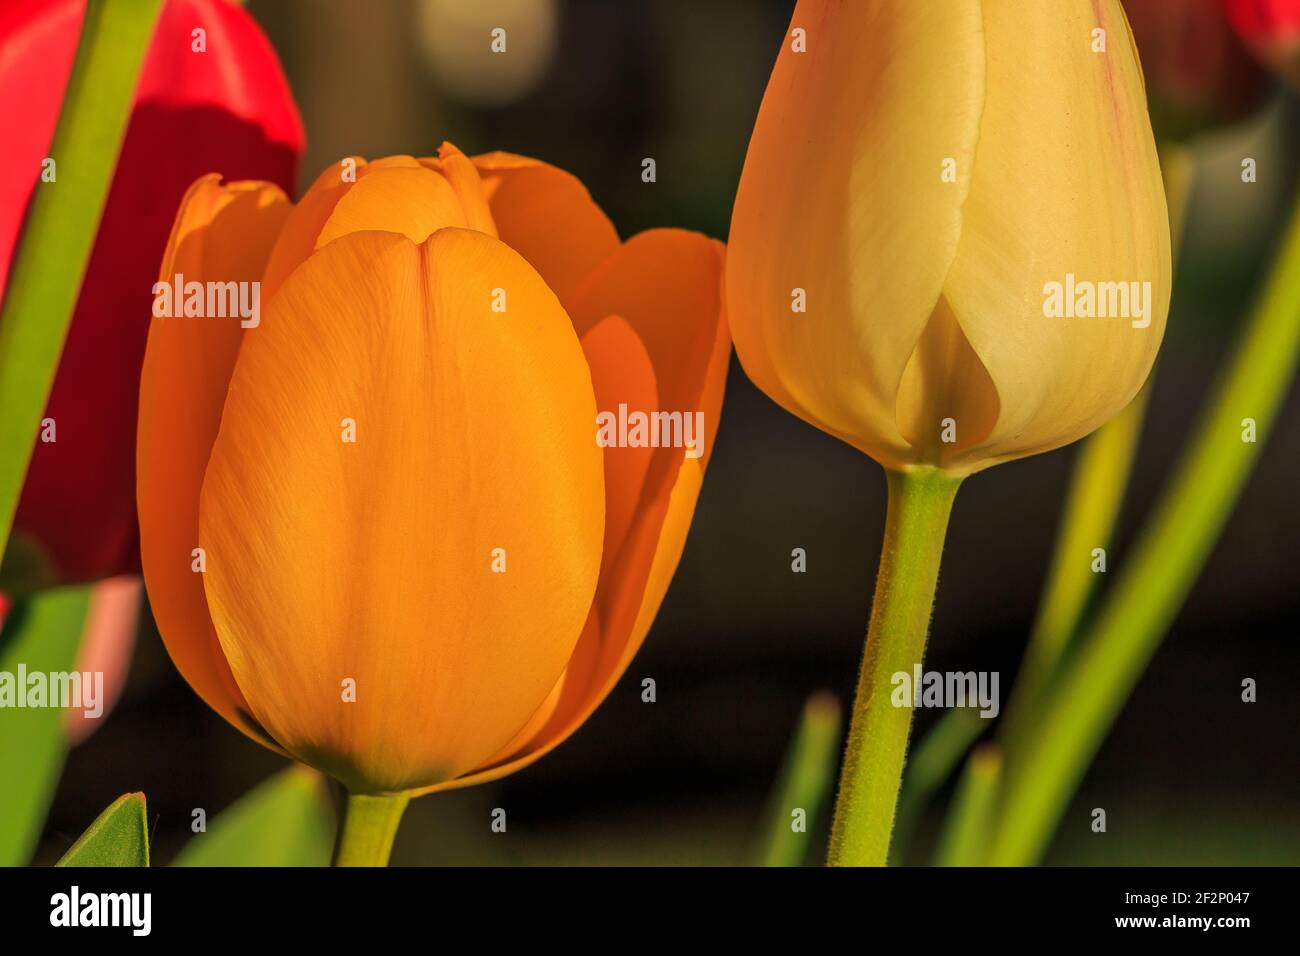 red yellow orange bloom of tulips in sunshine. Flowers in spring with a slightly open bloom. Tulips with a green stem and leaves. Petals in detail. Stock Photo